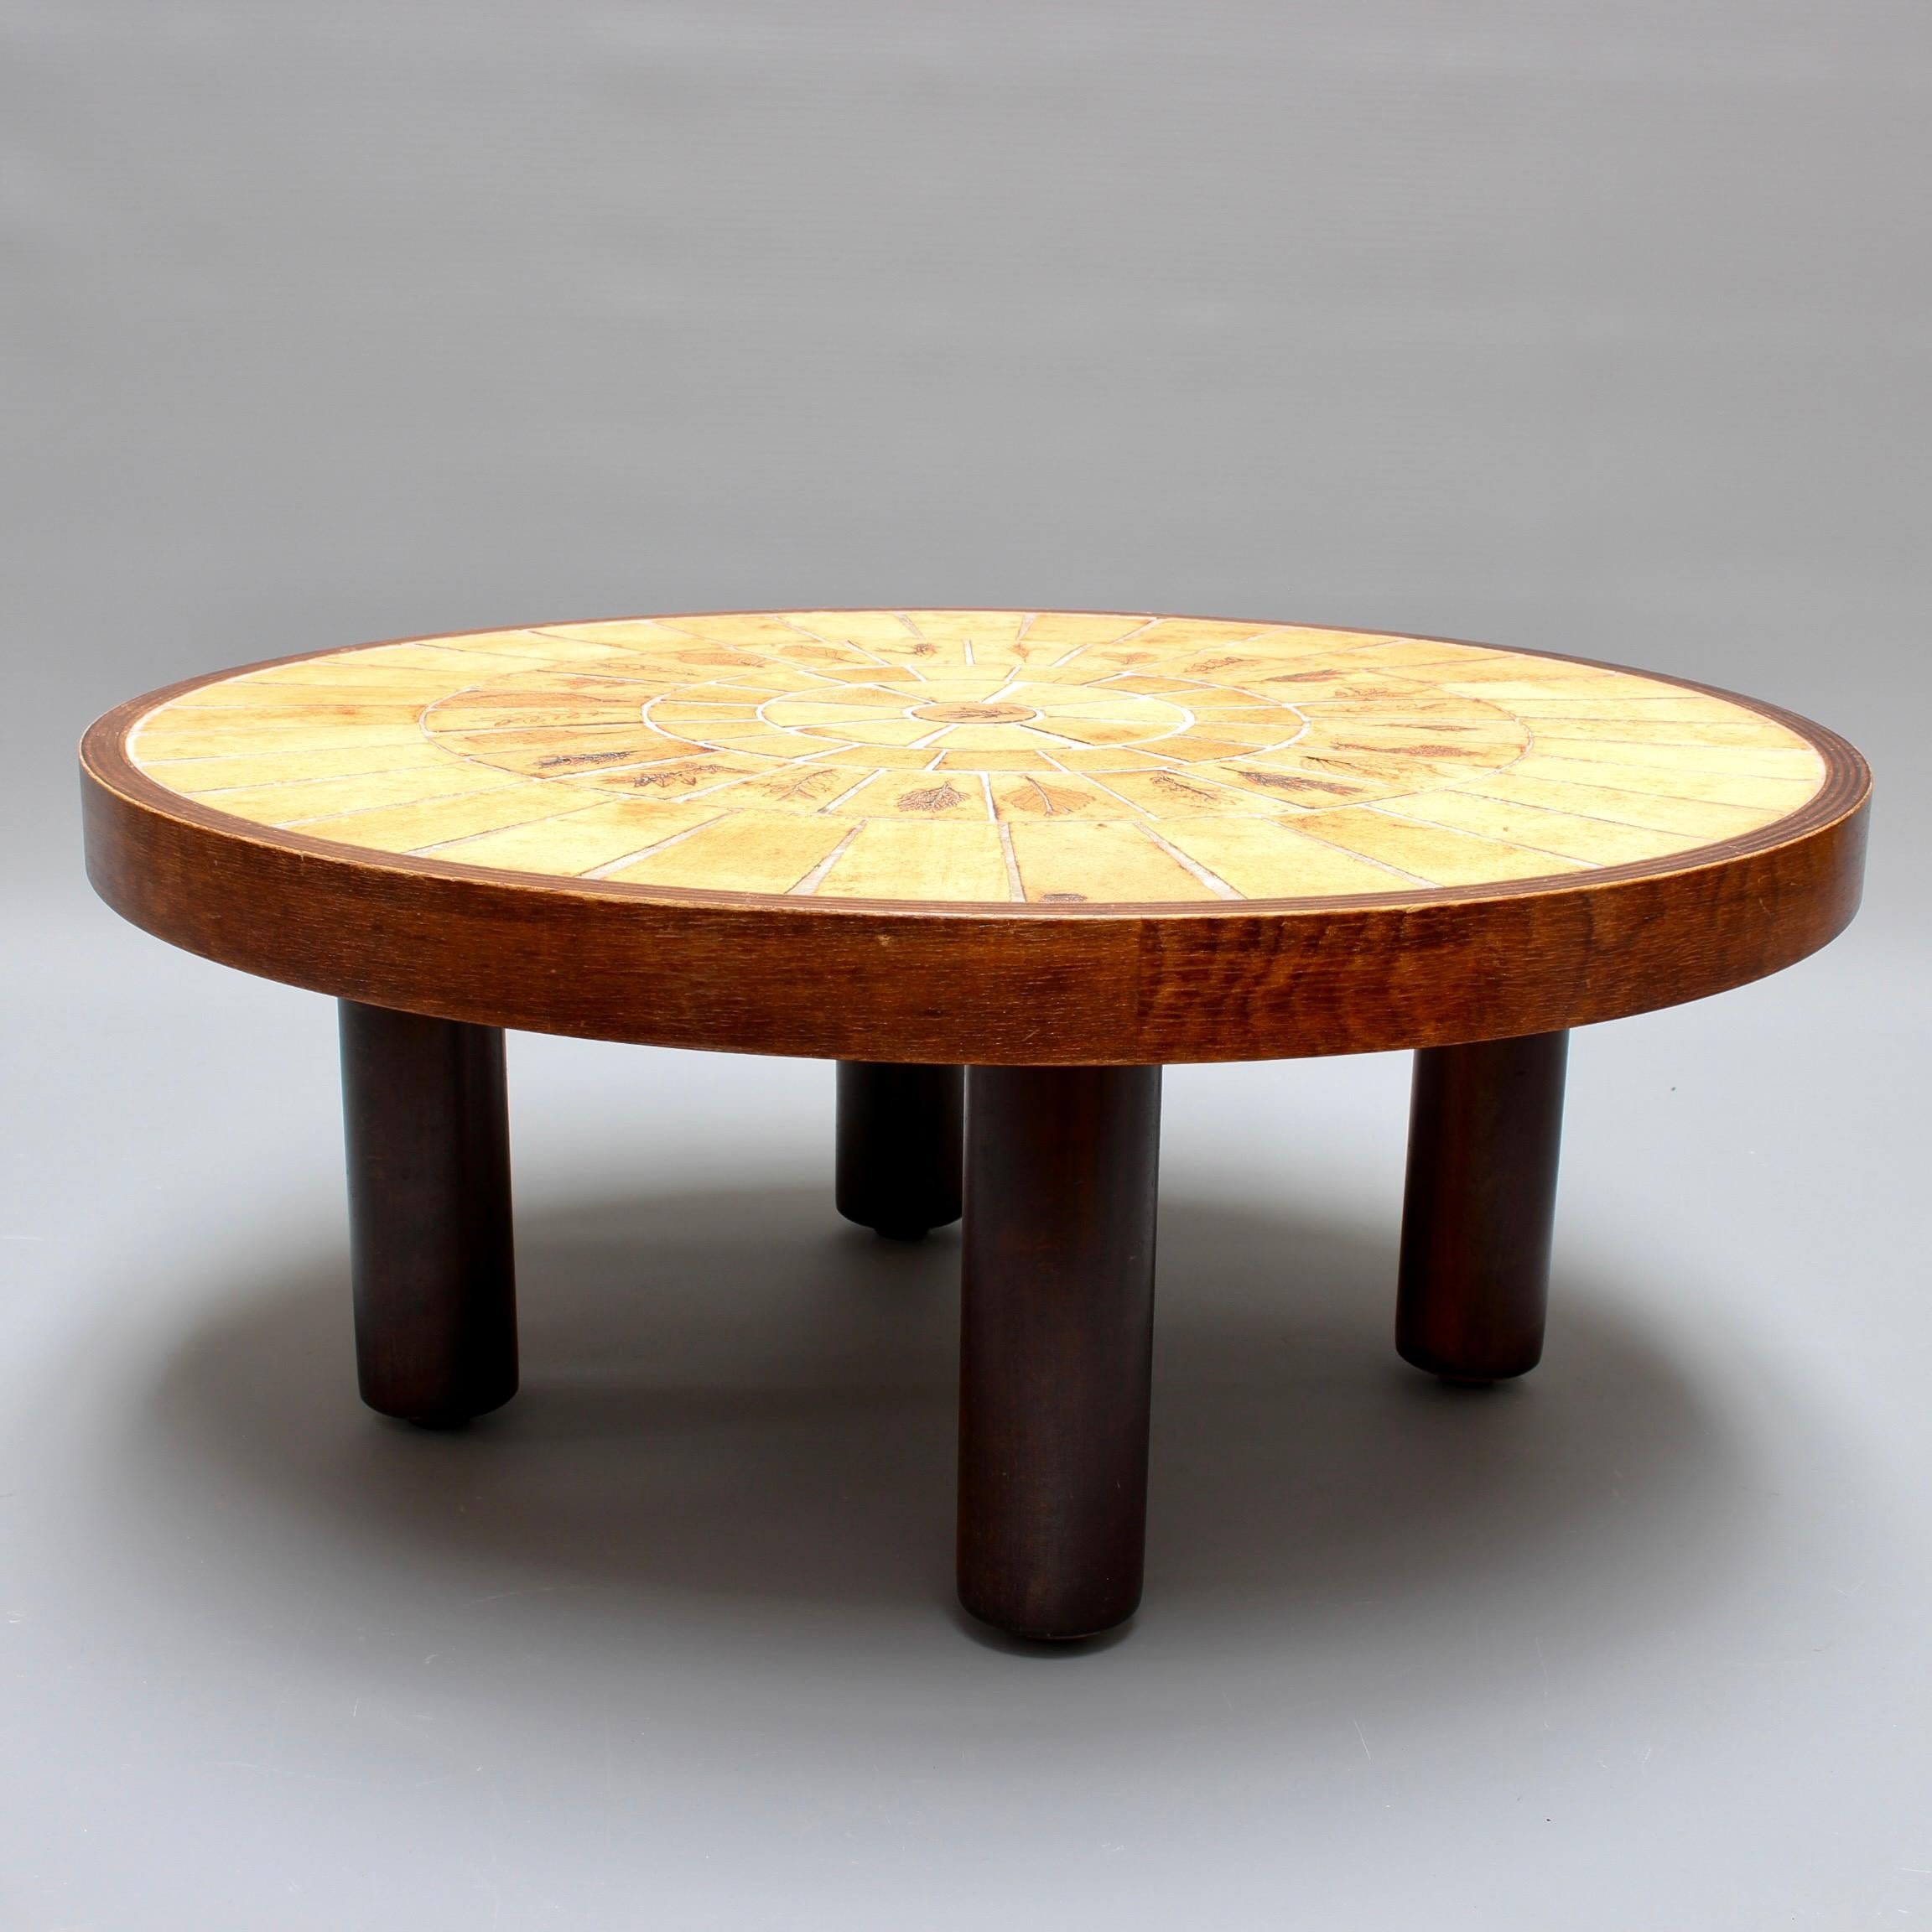 Mid-Century Modern Coffee Table with Leaf Motif by Roger Capron 'circa 1970s'